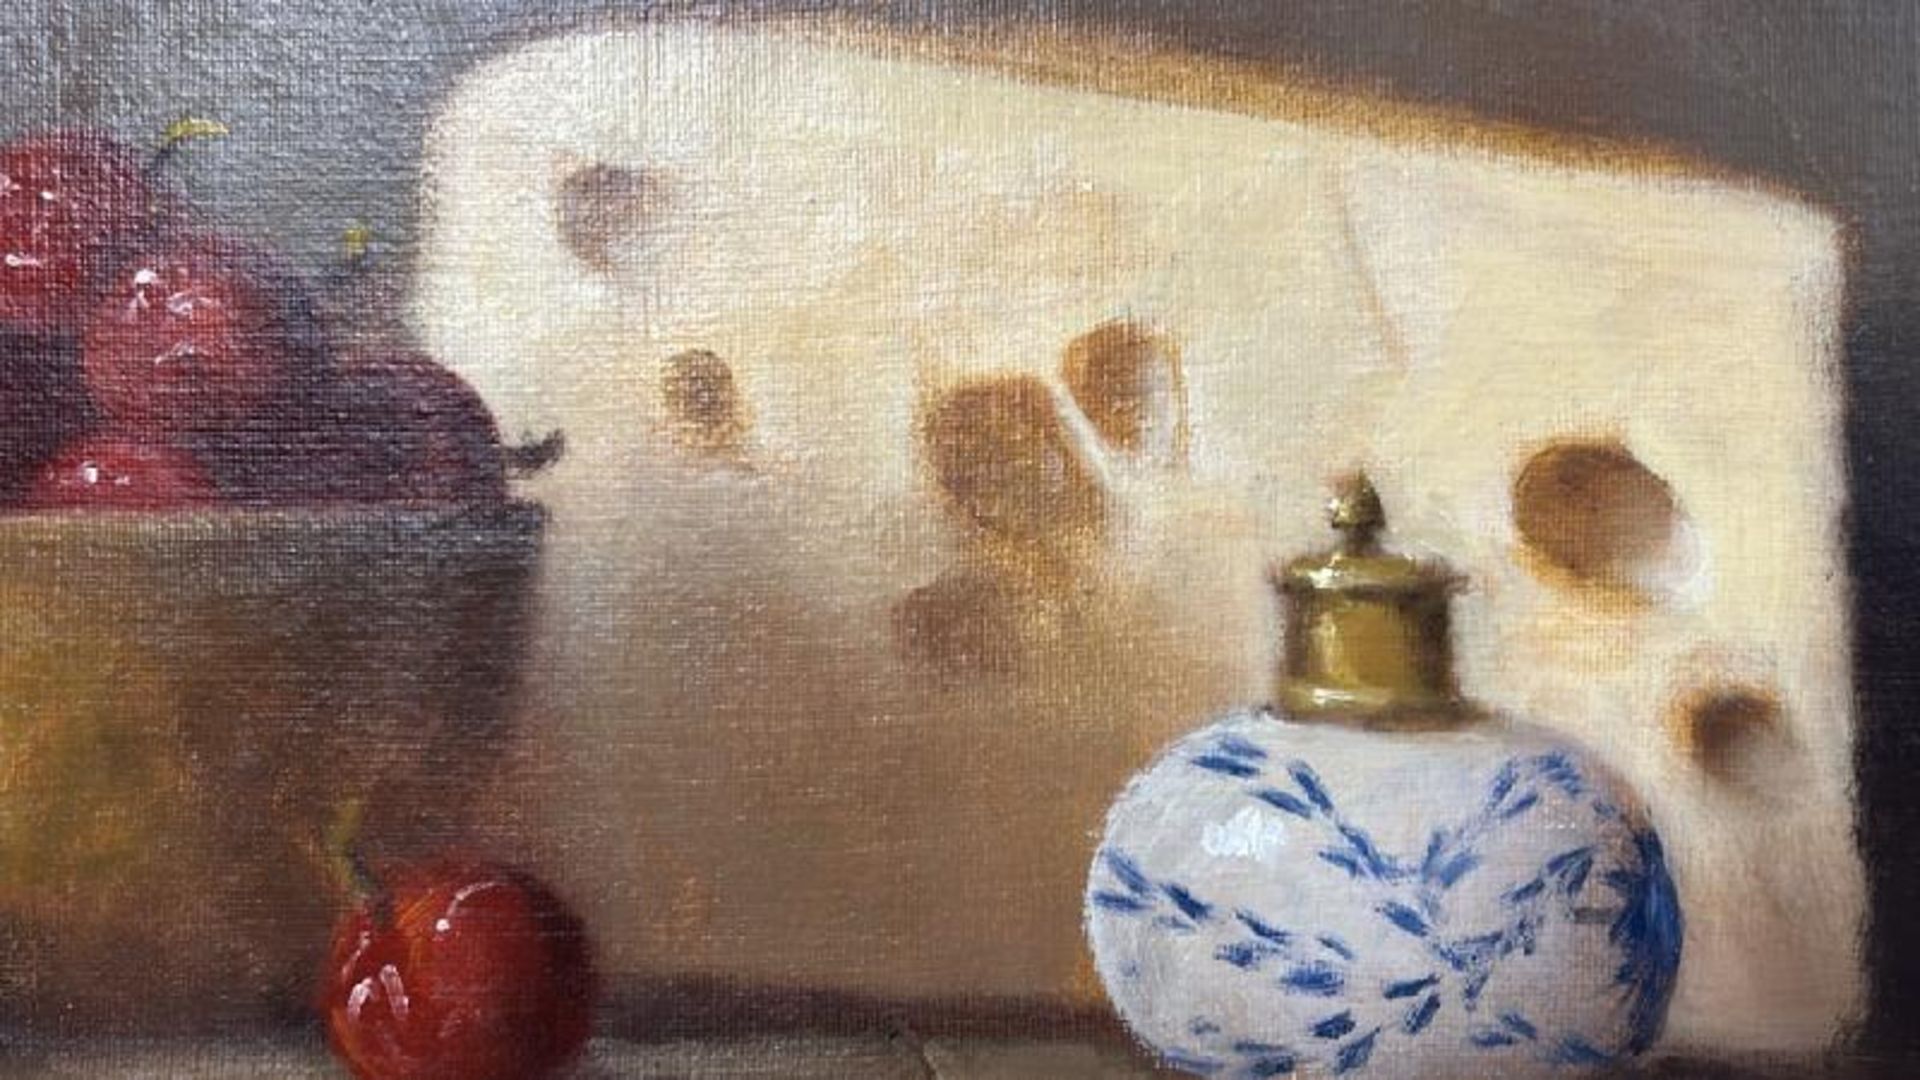 Still life oil on canvas, "Cheese & Cherry's" indistictly signed in red, top right corner, 58 x 48cm - Image 3 of 5